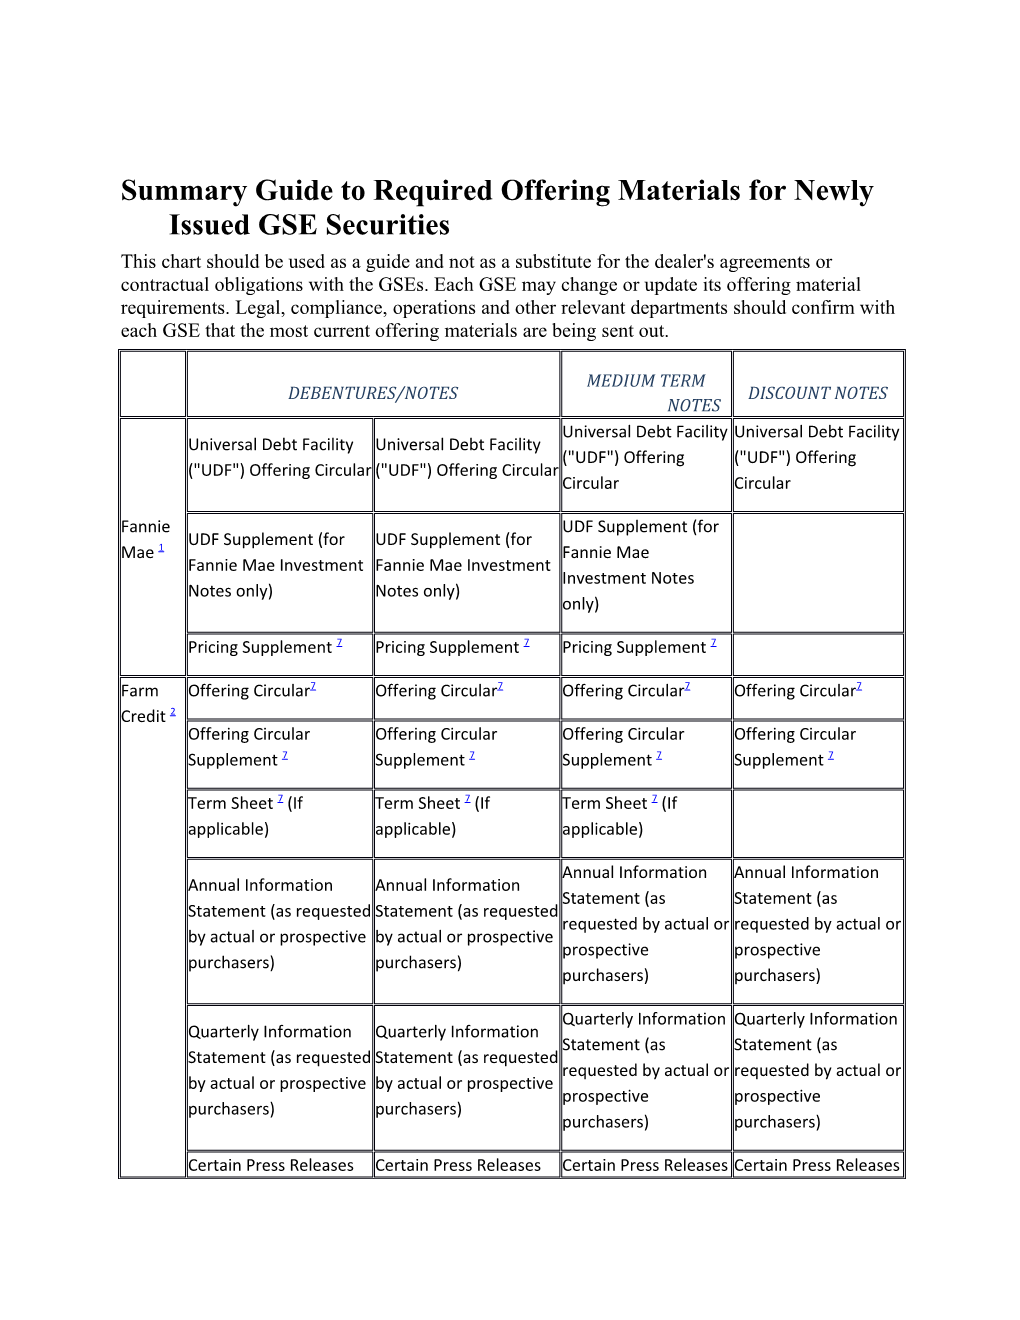 Summary Guide to Required Offering Materials for Newly Issued GSE Securities